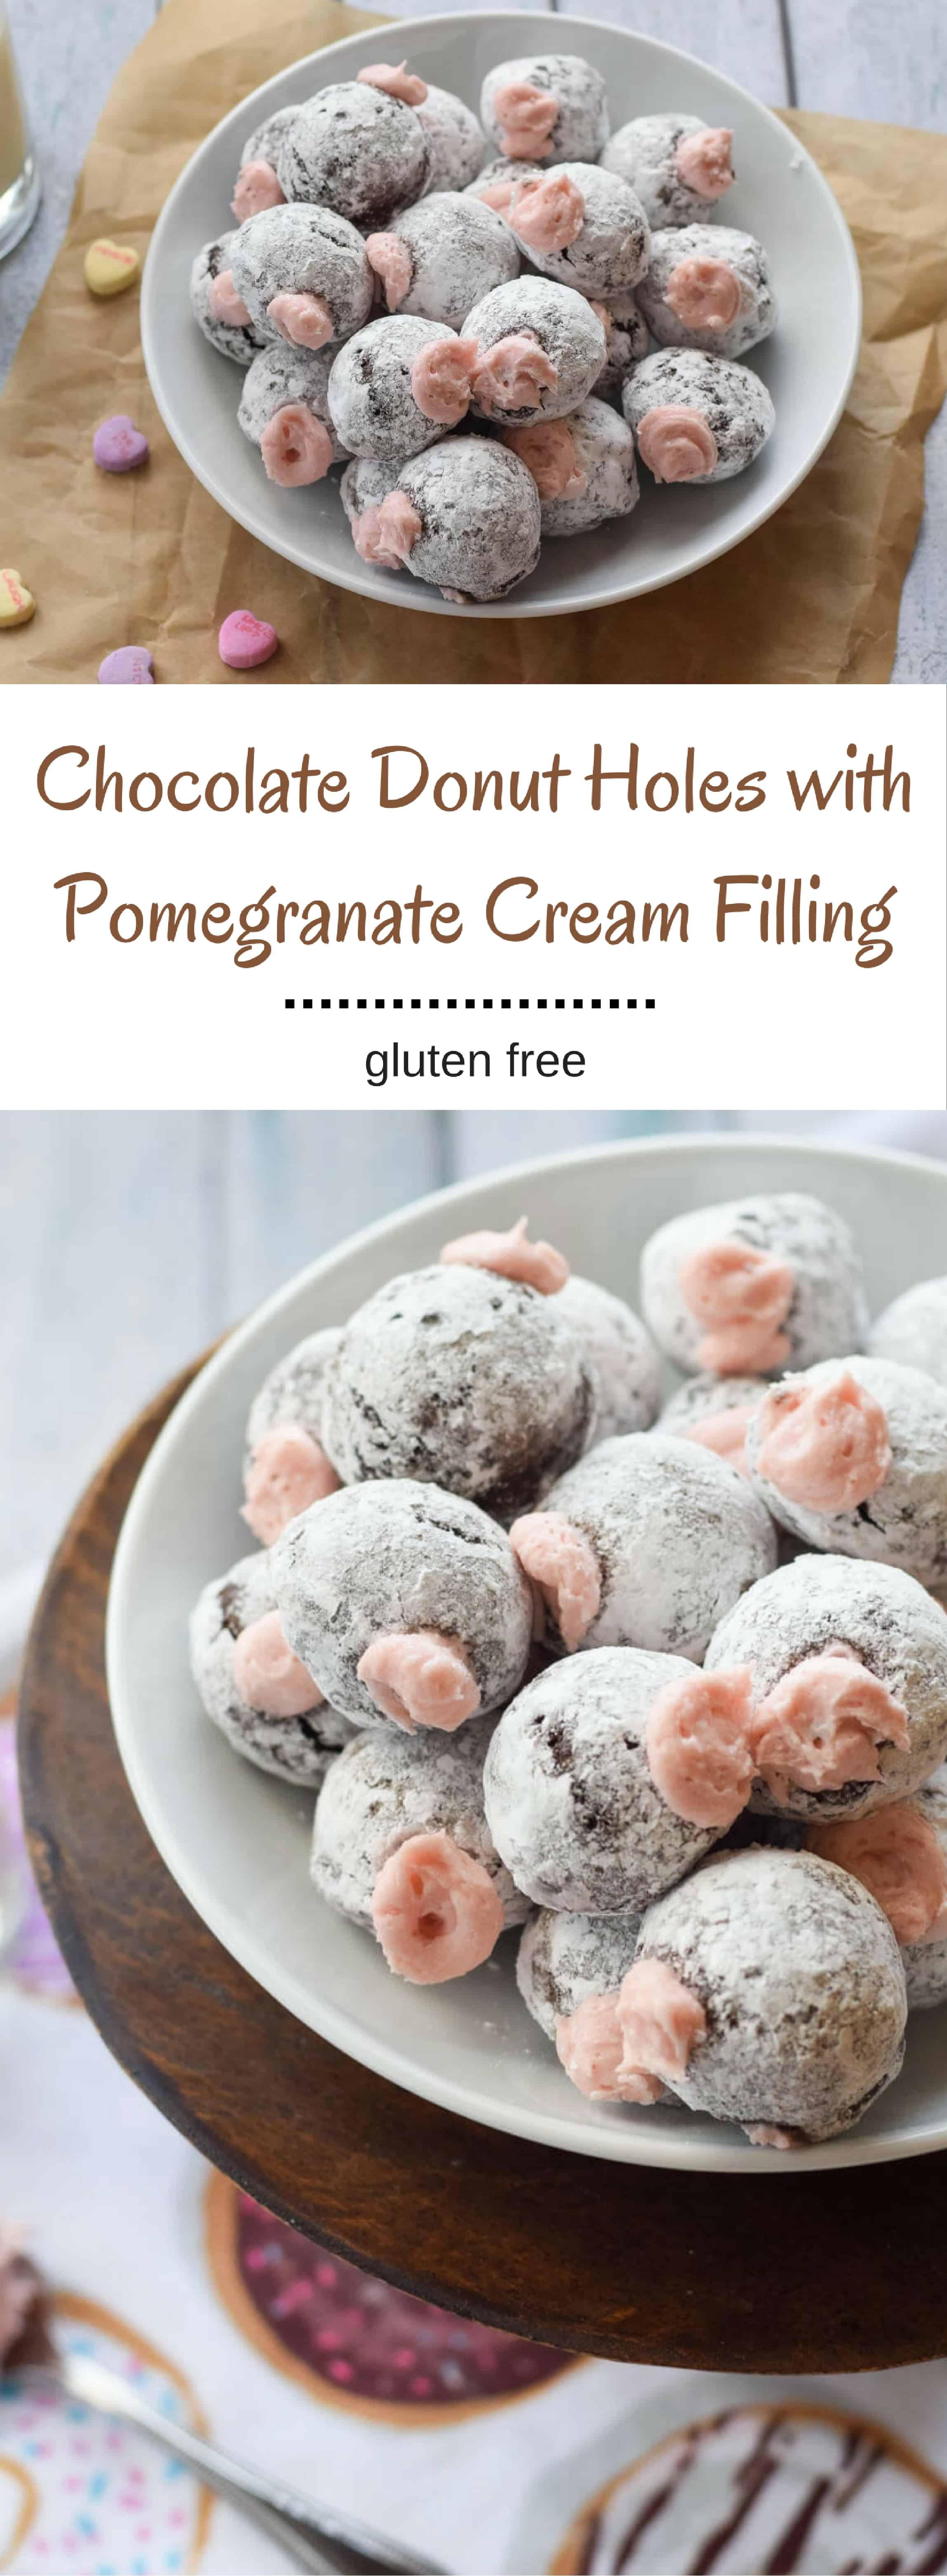 Chocolate Donut Holes with Pomegranate Cream Filling